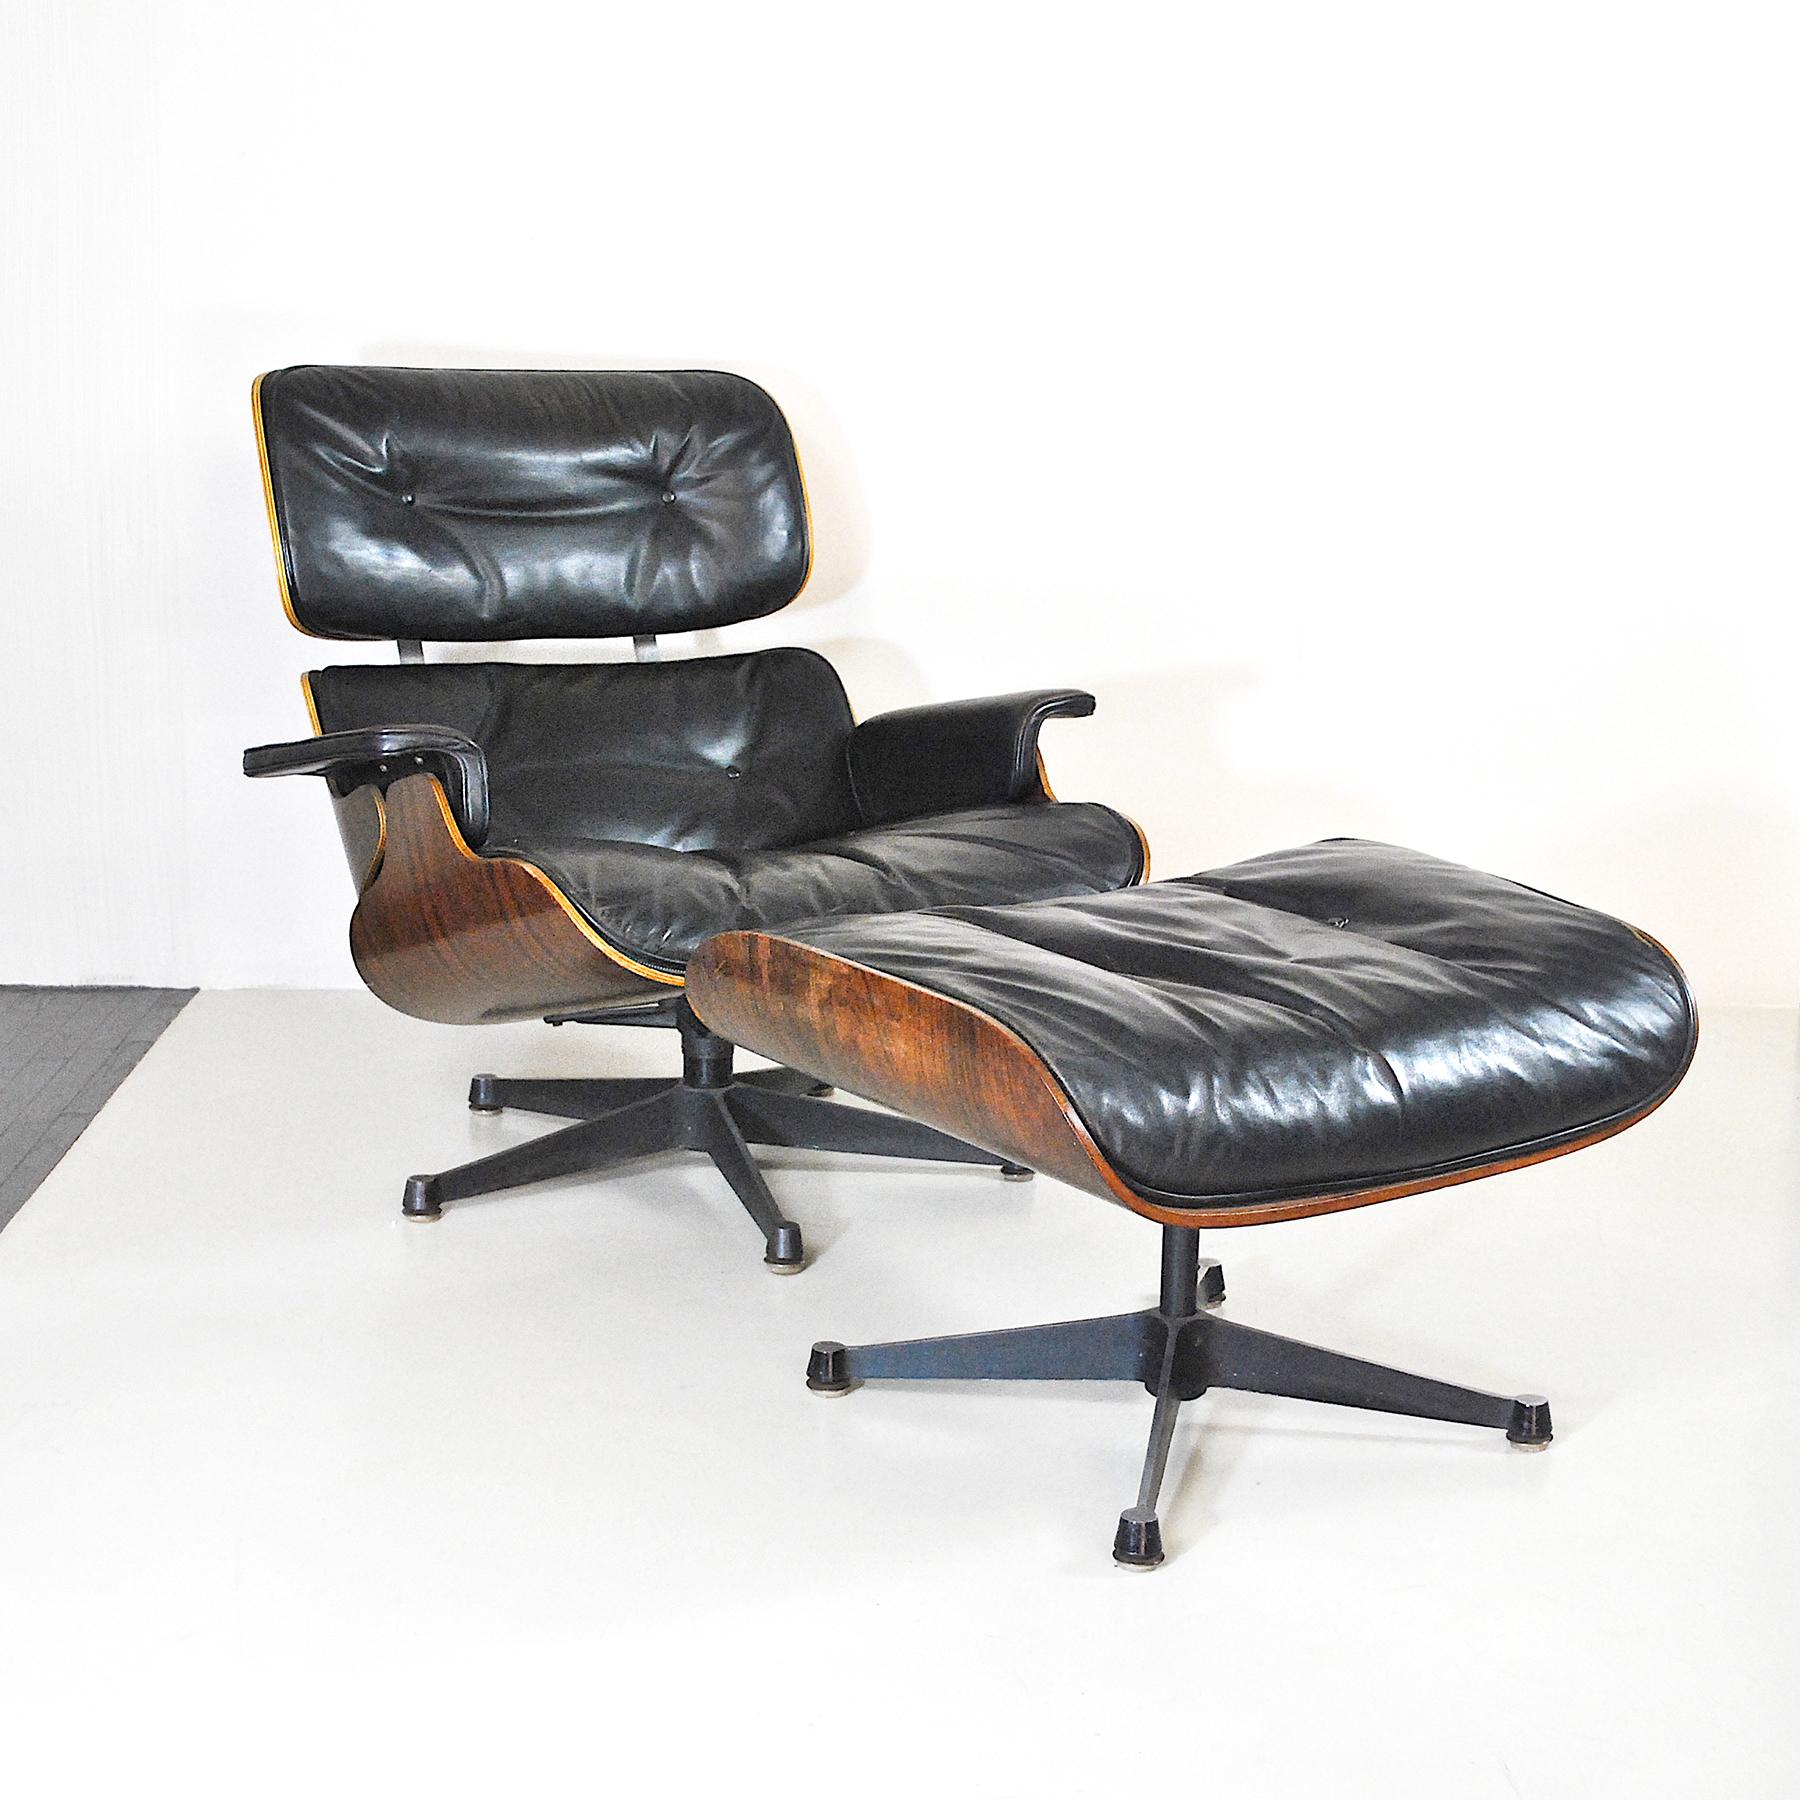 Central American Charles Eames Lounge Chair and Ottomana for Herman Miller